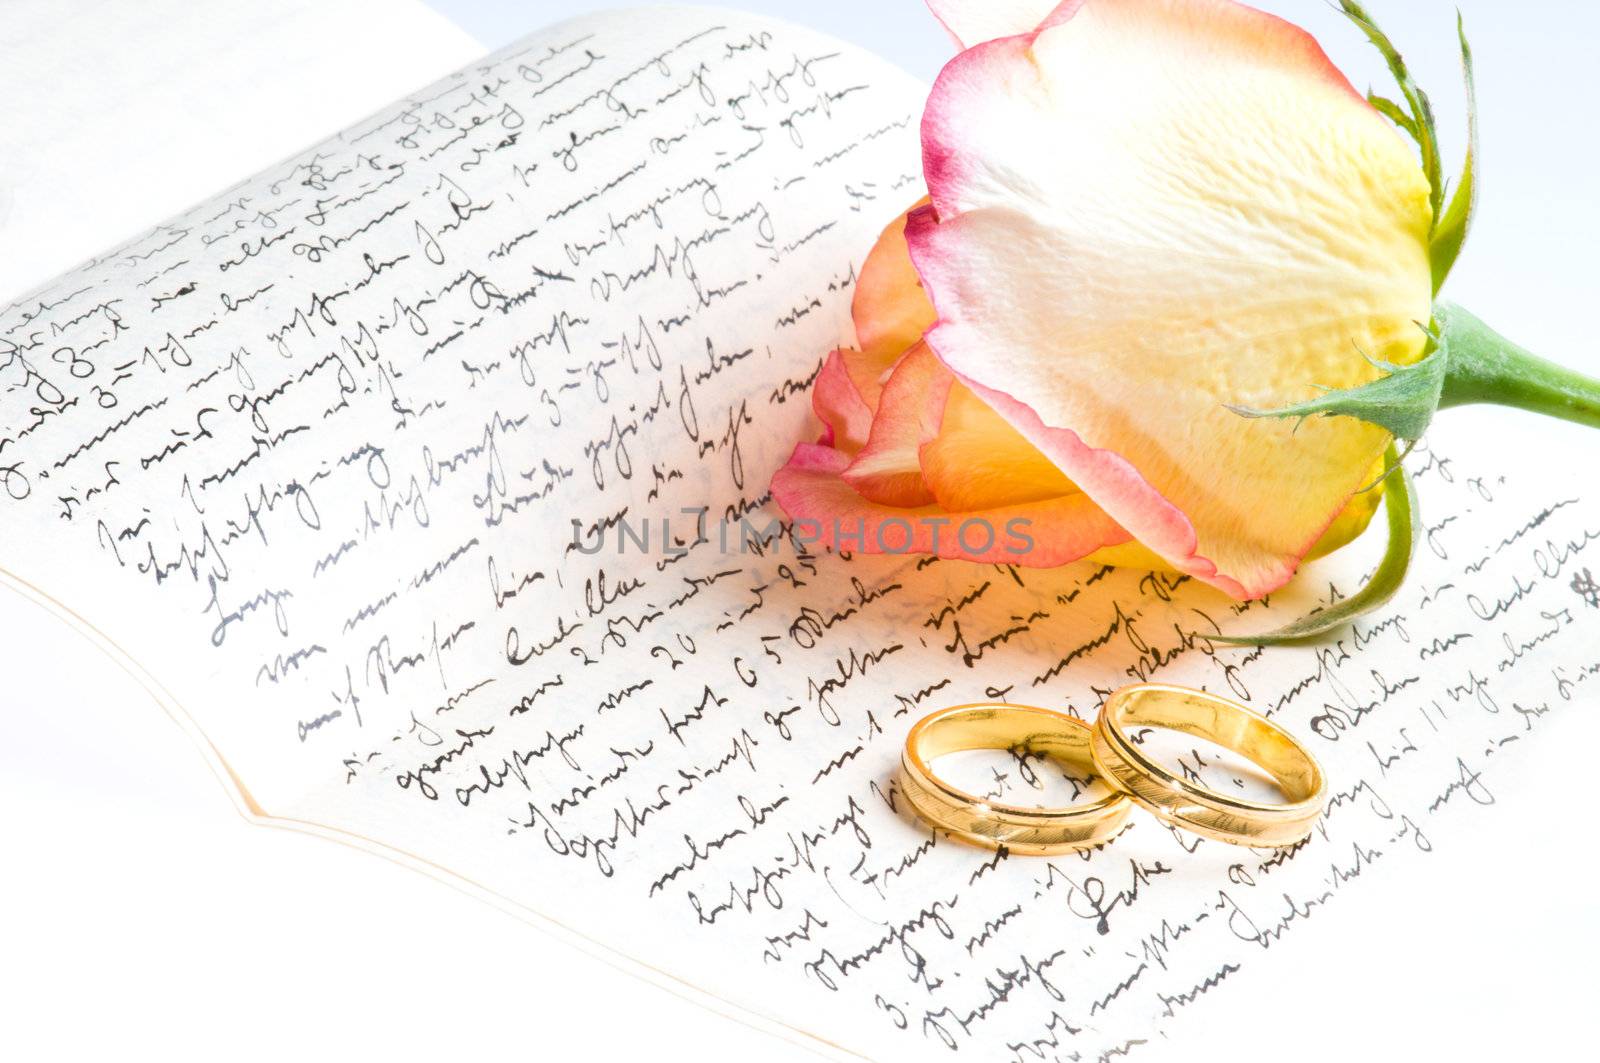 Red yellow rose and gold rings over a hand written love letter